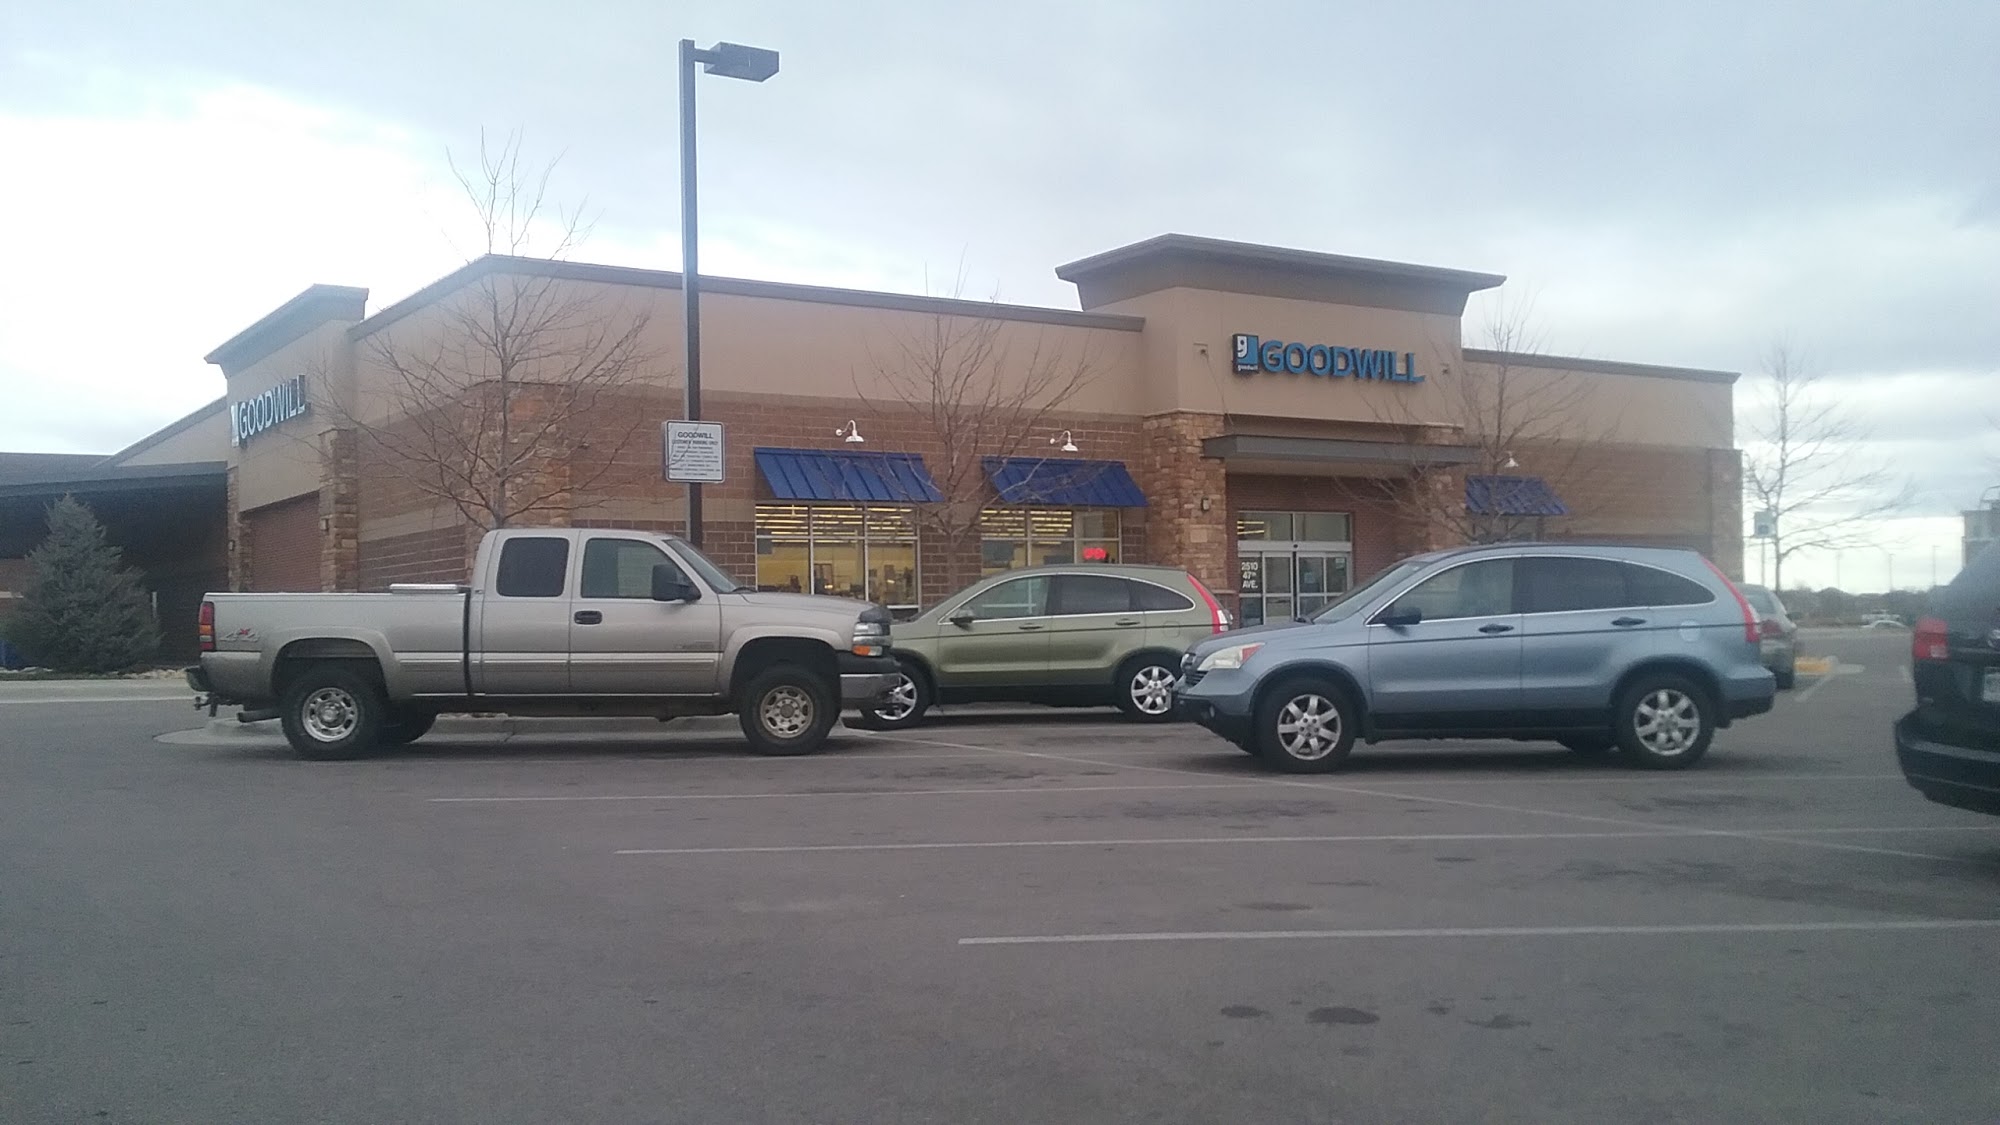 Goodwill Greeley Store & Donation Center